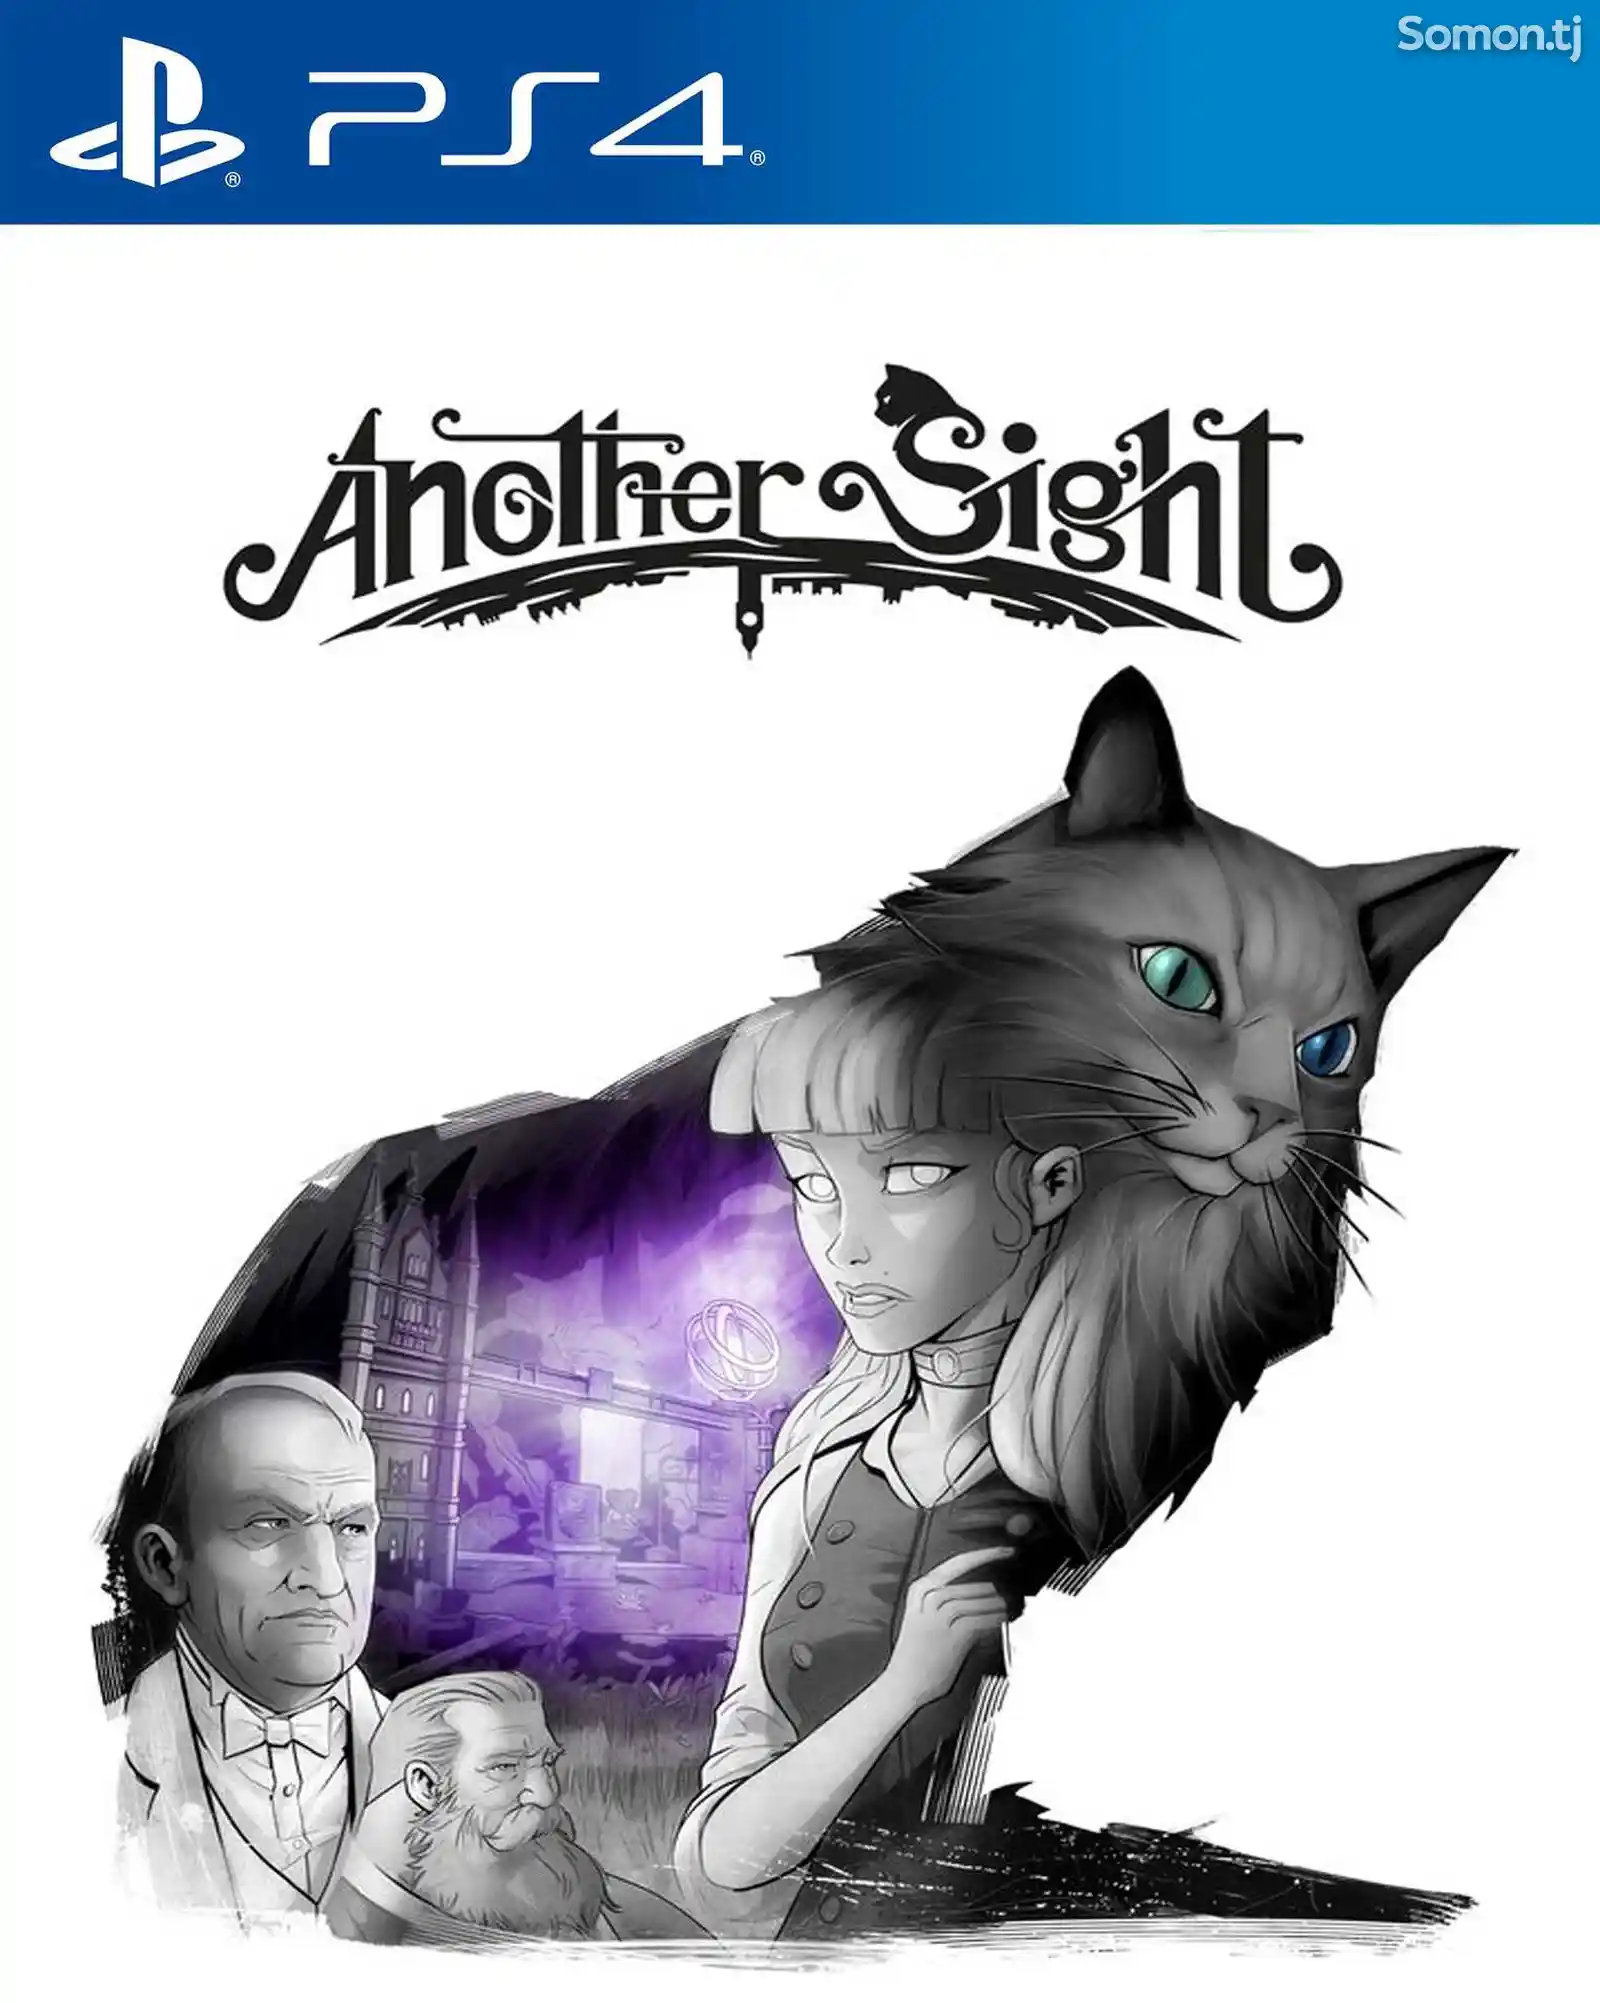 Игра Another sight для PS-4 / 5.05 / 6.72 / 7.02 / 7.55 / 9.00 /-1